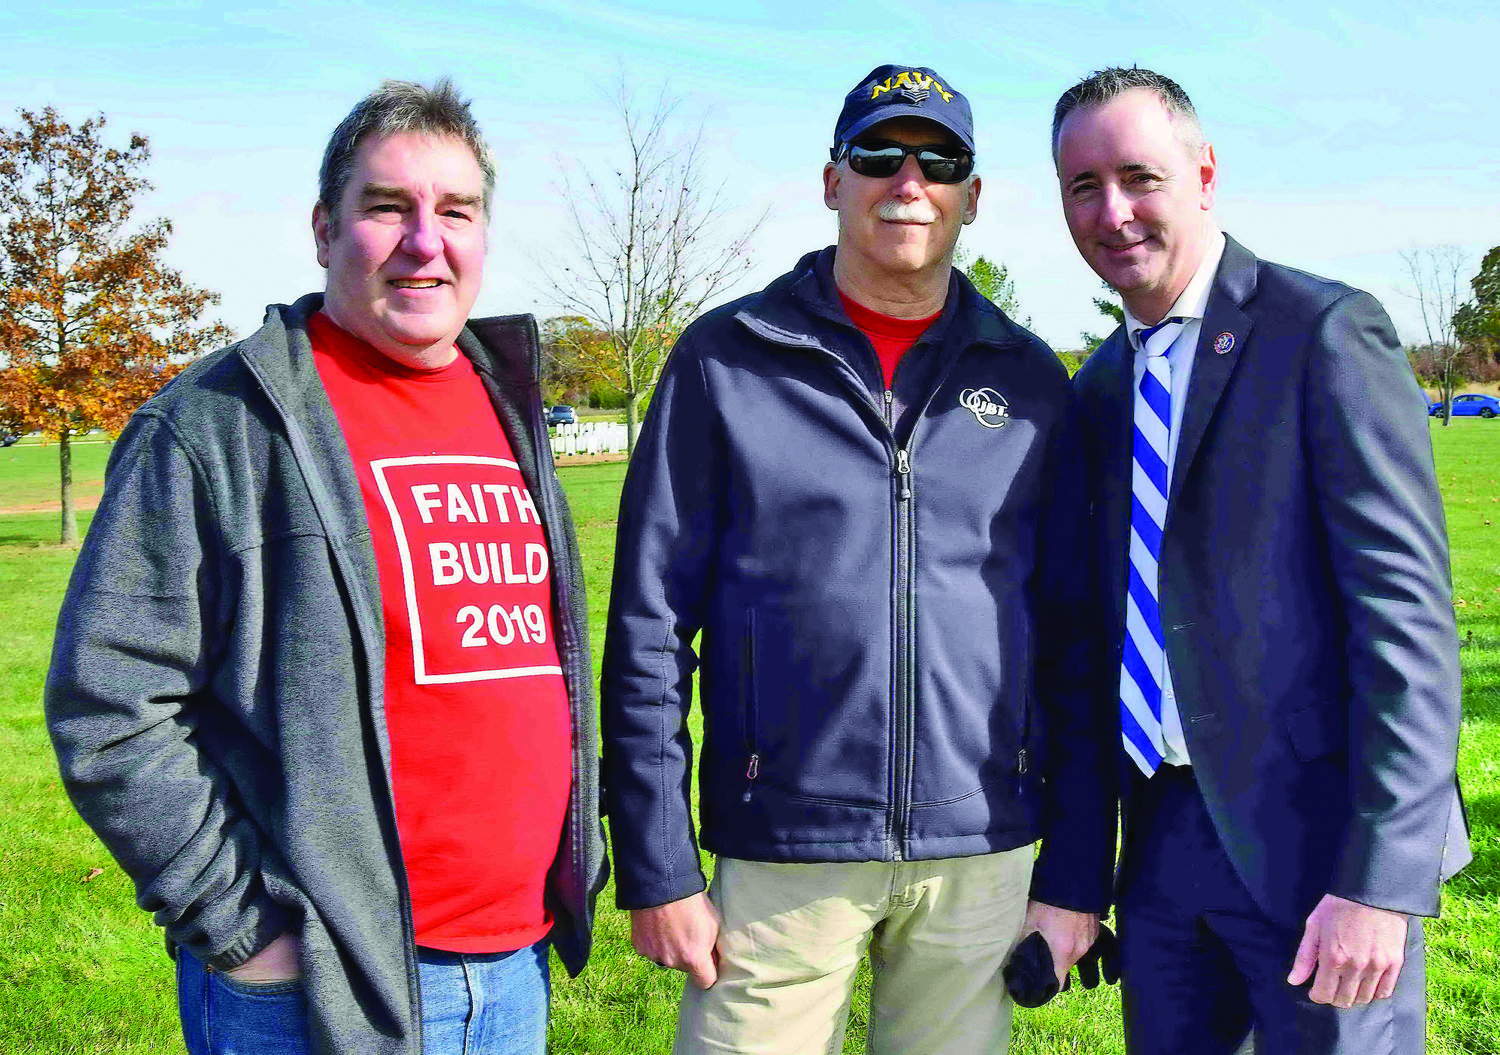 Veterans Curtis Dehaven and Guy Schettig with U.S. Rep. Brian Fitzpatrick.